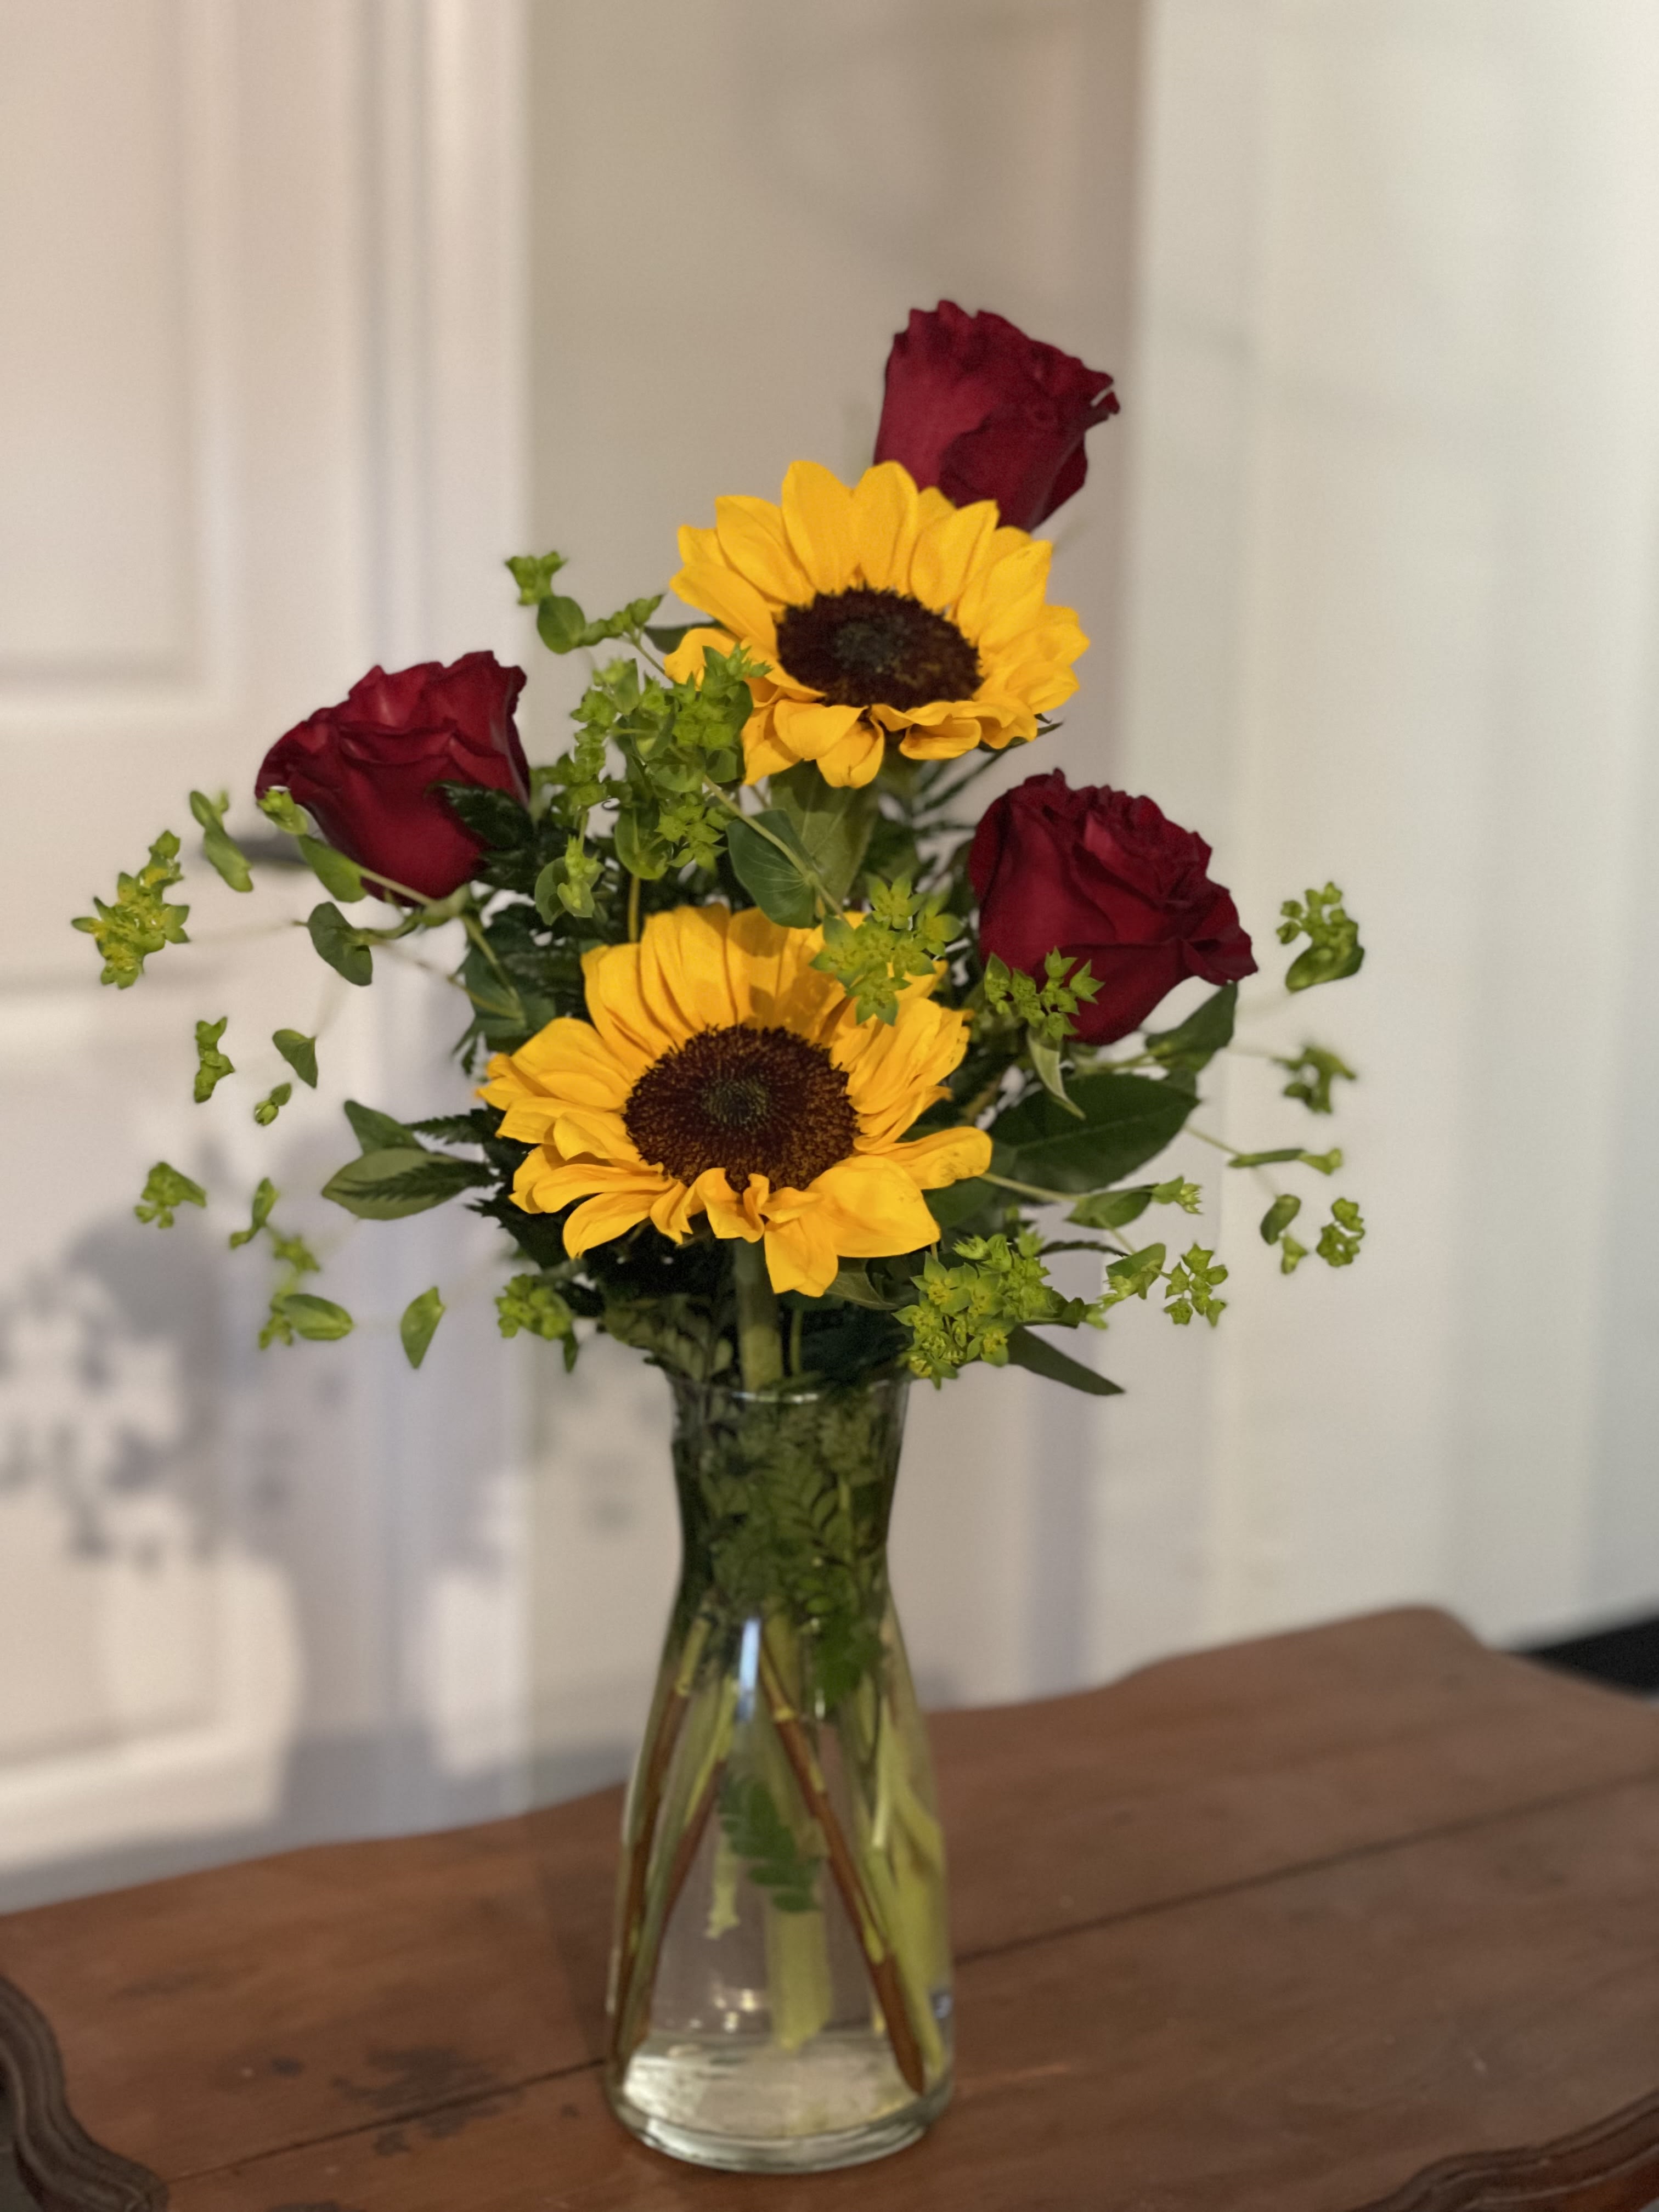 Mini Sunny Love - Sunflowers and Roses are always sure to be a favorite!  